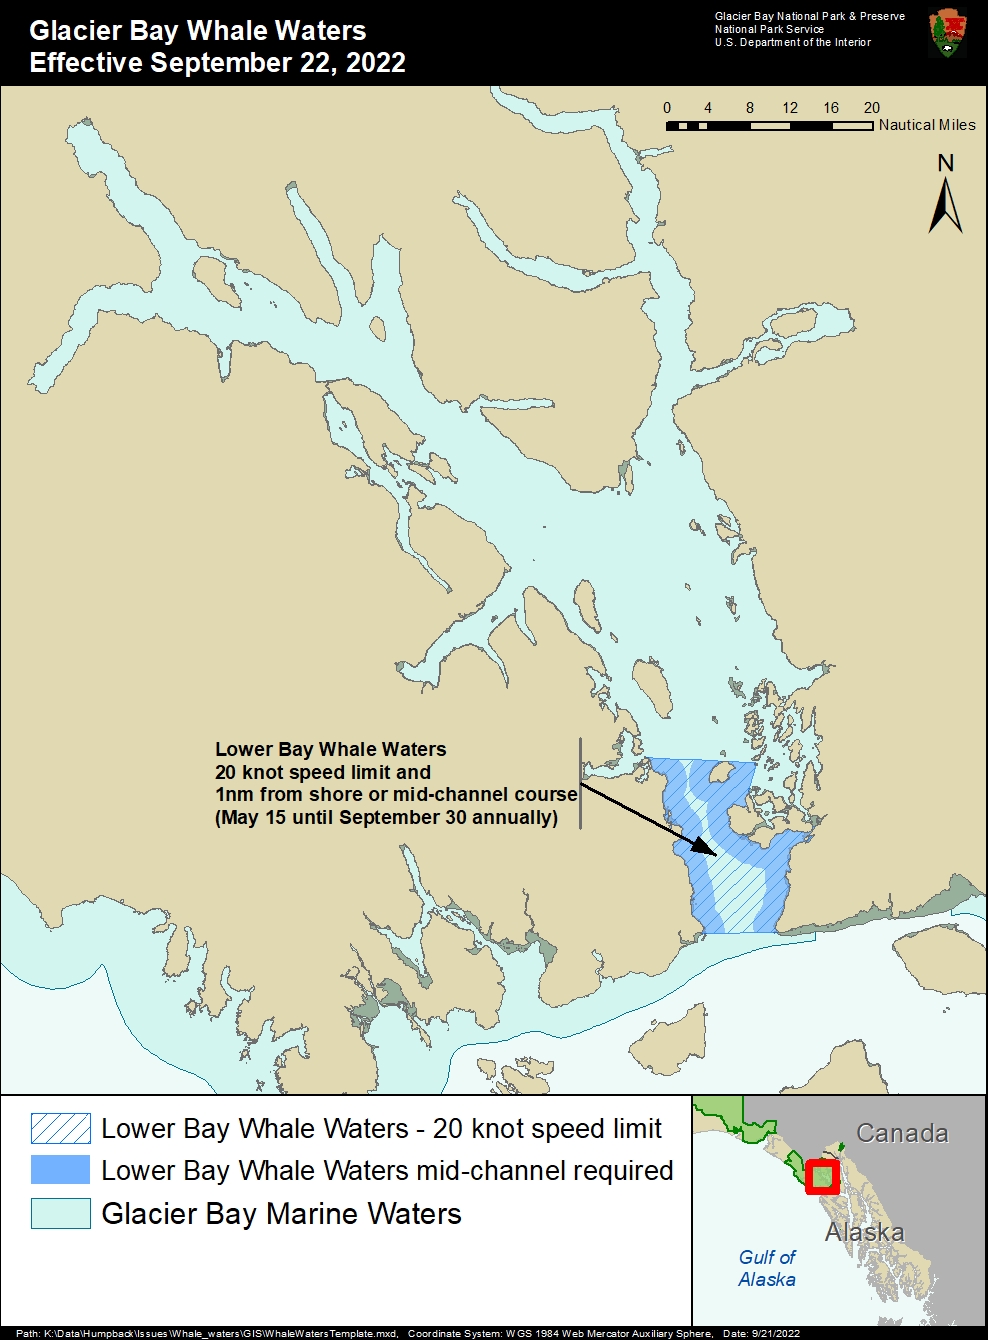 Whale Waters Map 21 Sept 2022. Contact the park for full details of current whale waters.